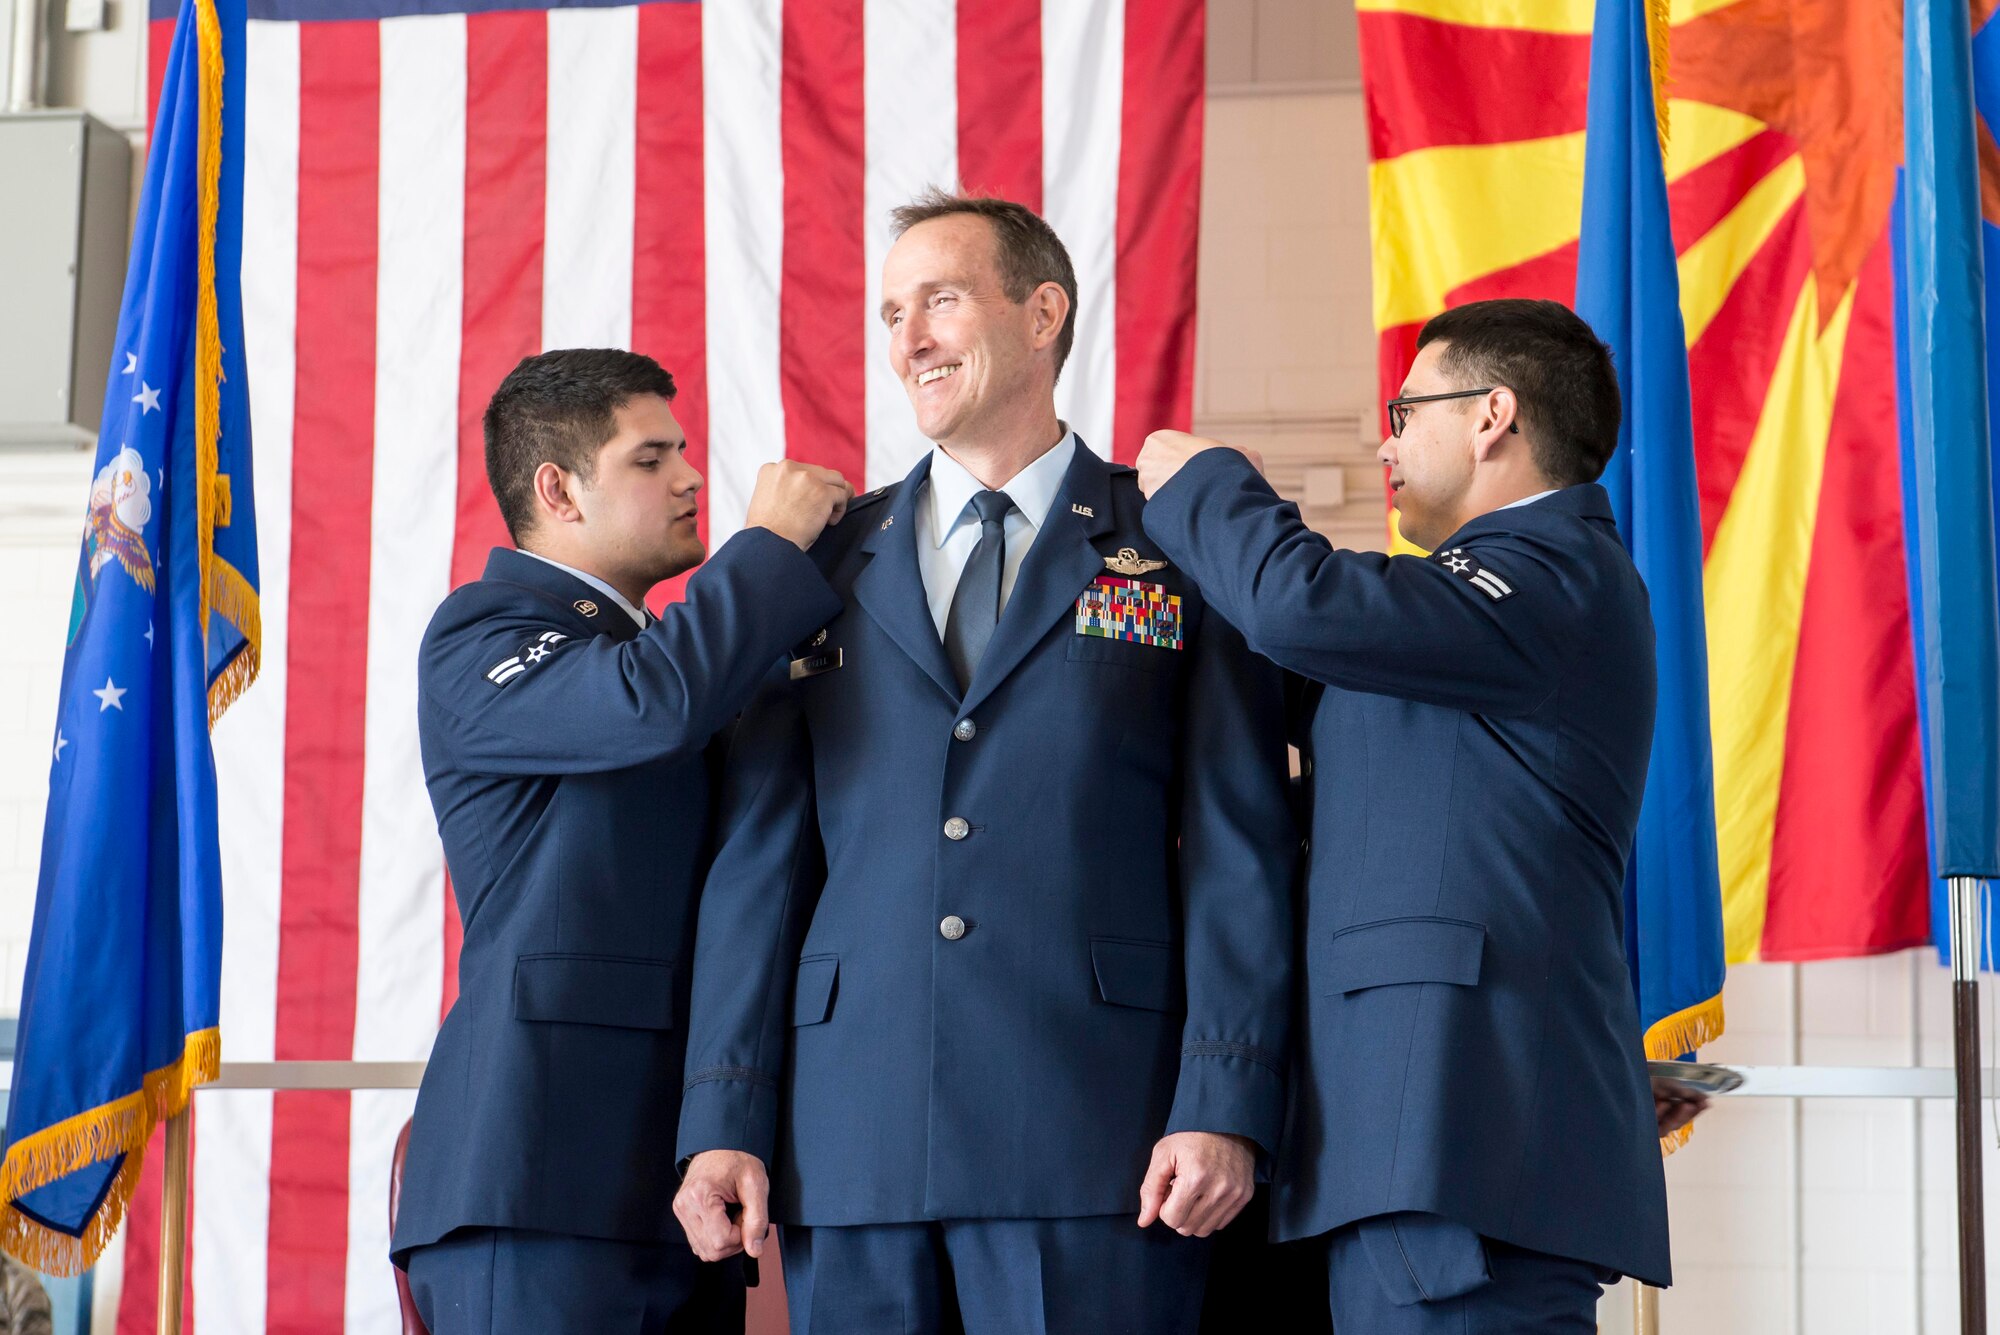 TUCSON, Ariz. – Airman 1st Class Ricardo Badilla, left, and Airman 1st Class Edwin Martinez, right, pin silver stars on newly-promoted Brig. Gen. Howard P. Purcell, 162nd Wing Commander, Nov. 7 at the 162 Wing at the Tucson International Airport. Breaking from tradition, Purcell chose the most junior enlisted Airmen from each group to perform the honor of pinning on the service dress jacket’s silver stars and placing new shoulder boards for his dress shirt – embodying a commitment to his own Air National Guard family. (U.S. Air National Guard photo by Tech. Sgt. Hollie A. Hansen /Released)